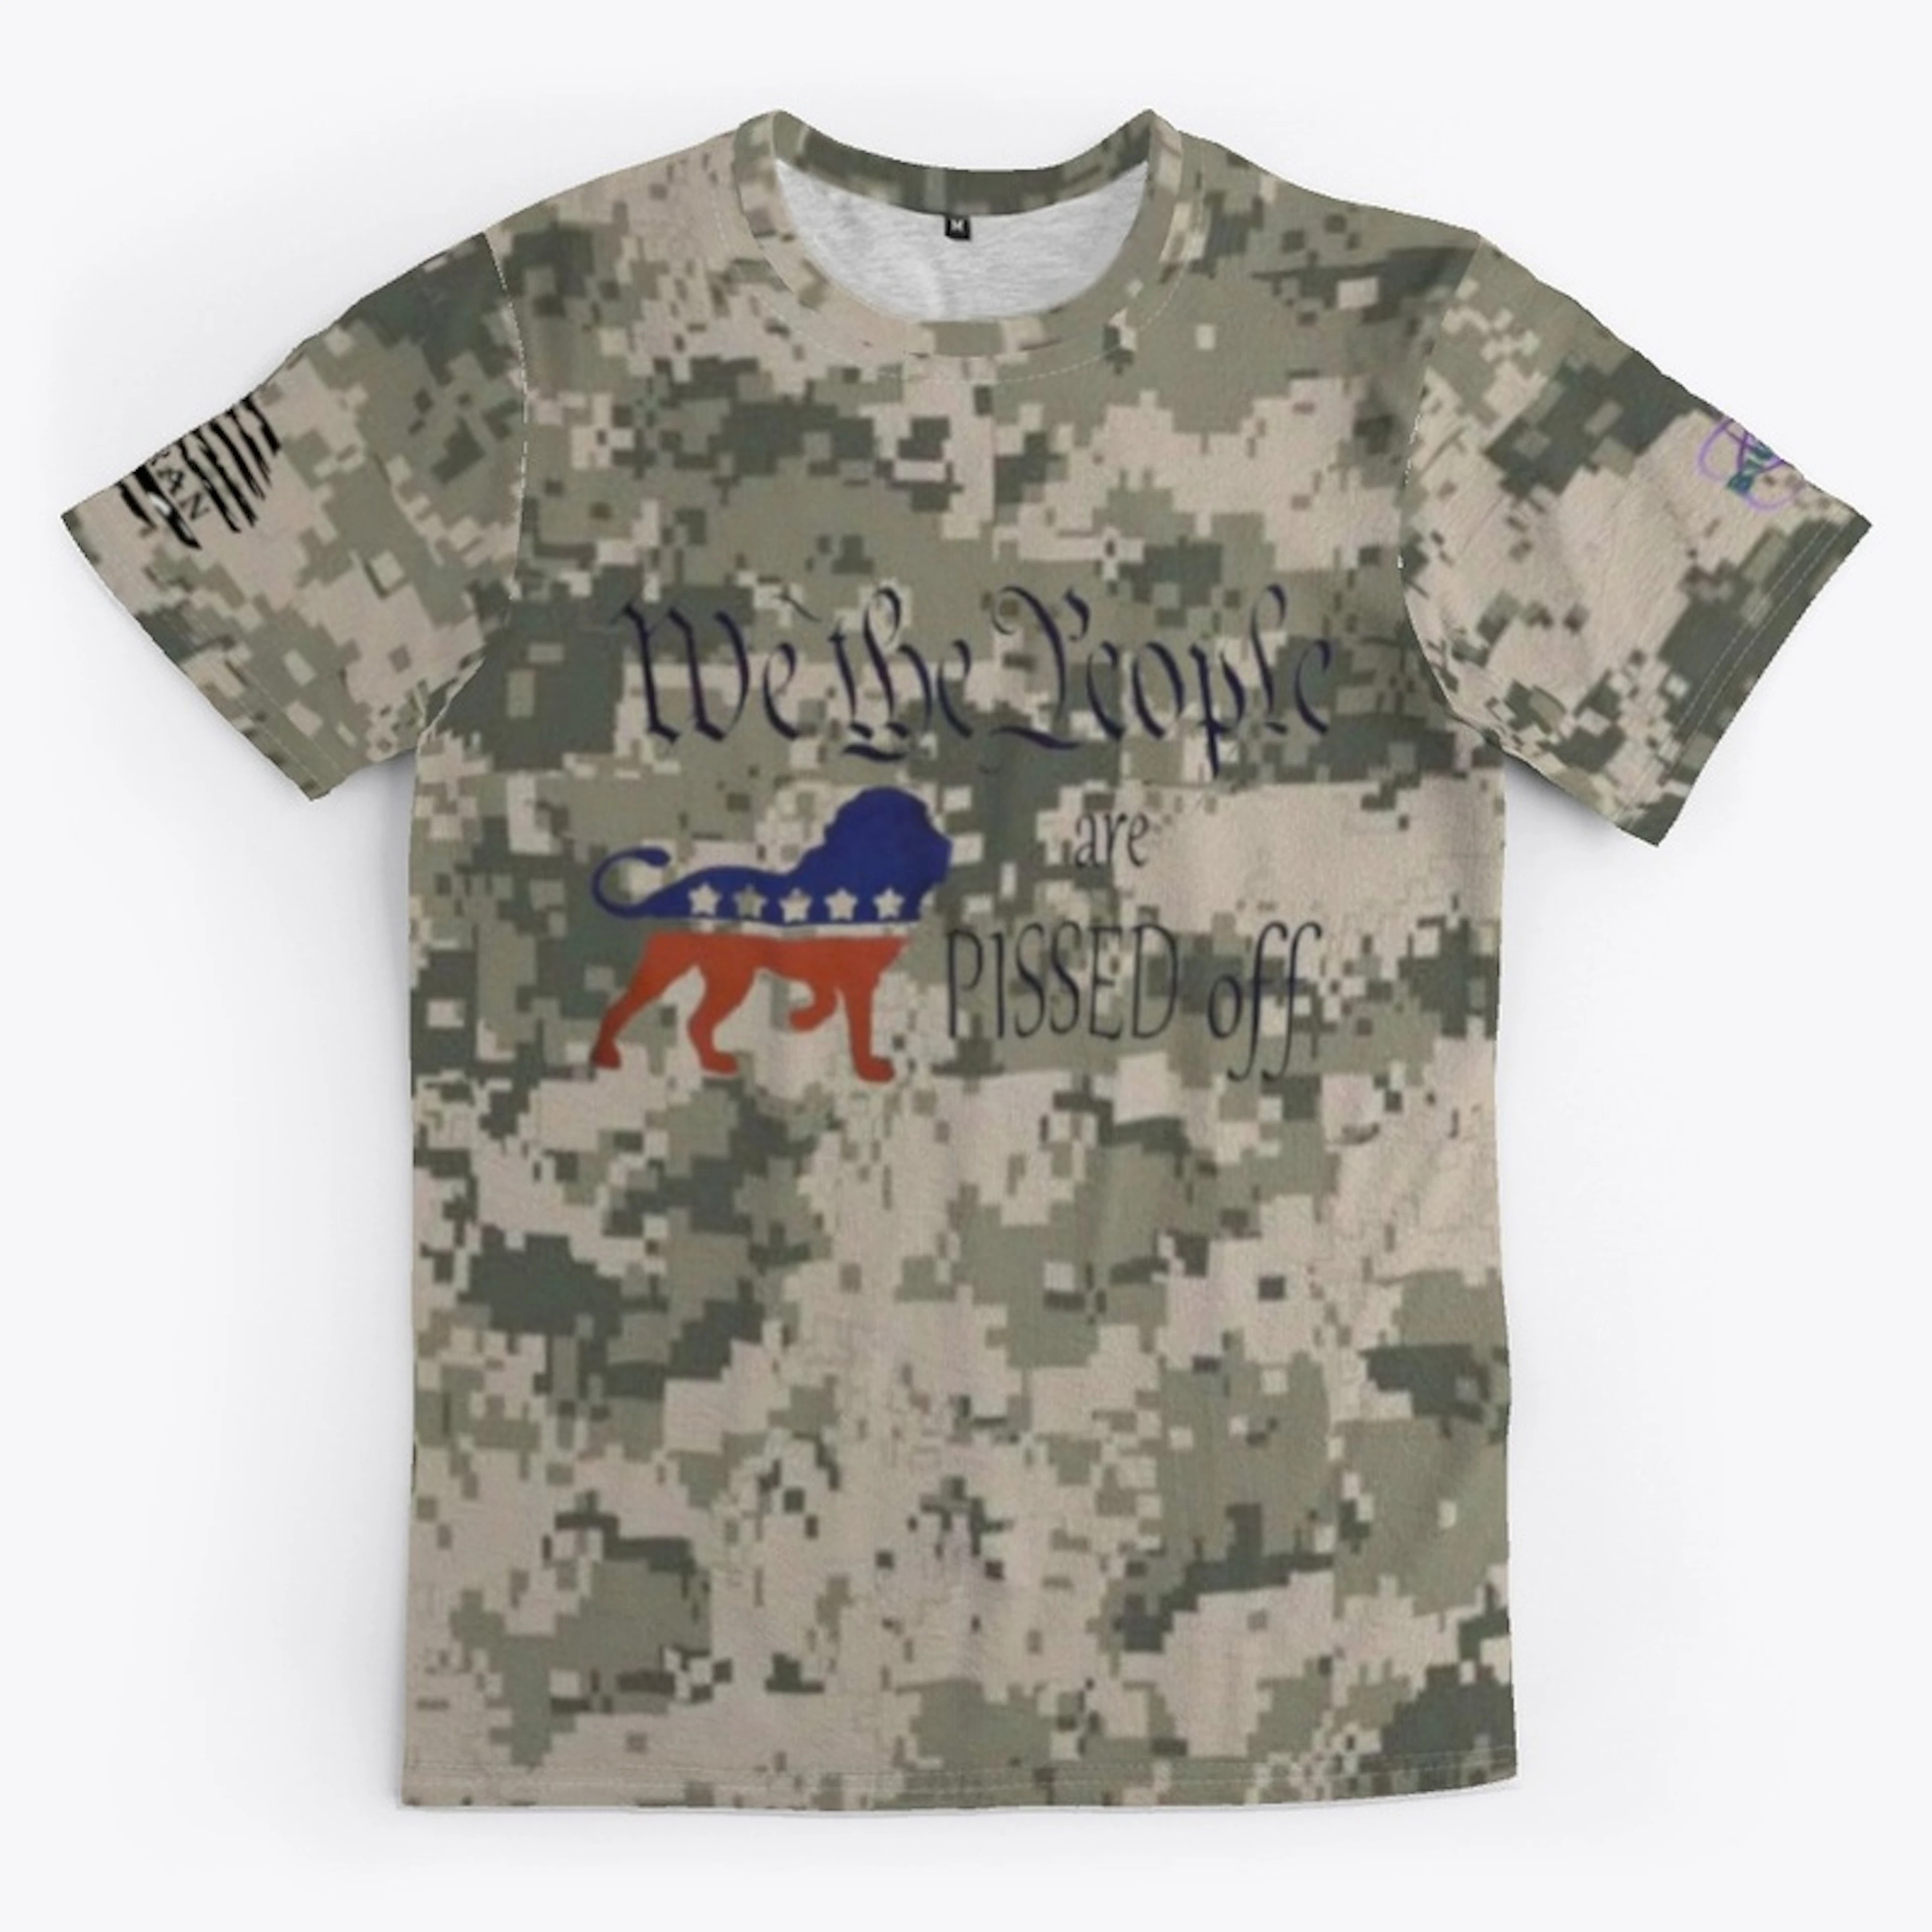 We The People Are Pissed- Acu Pattern